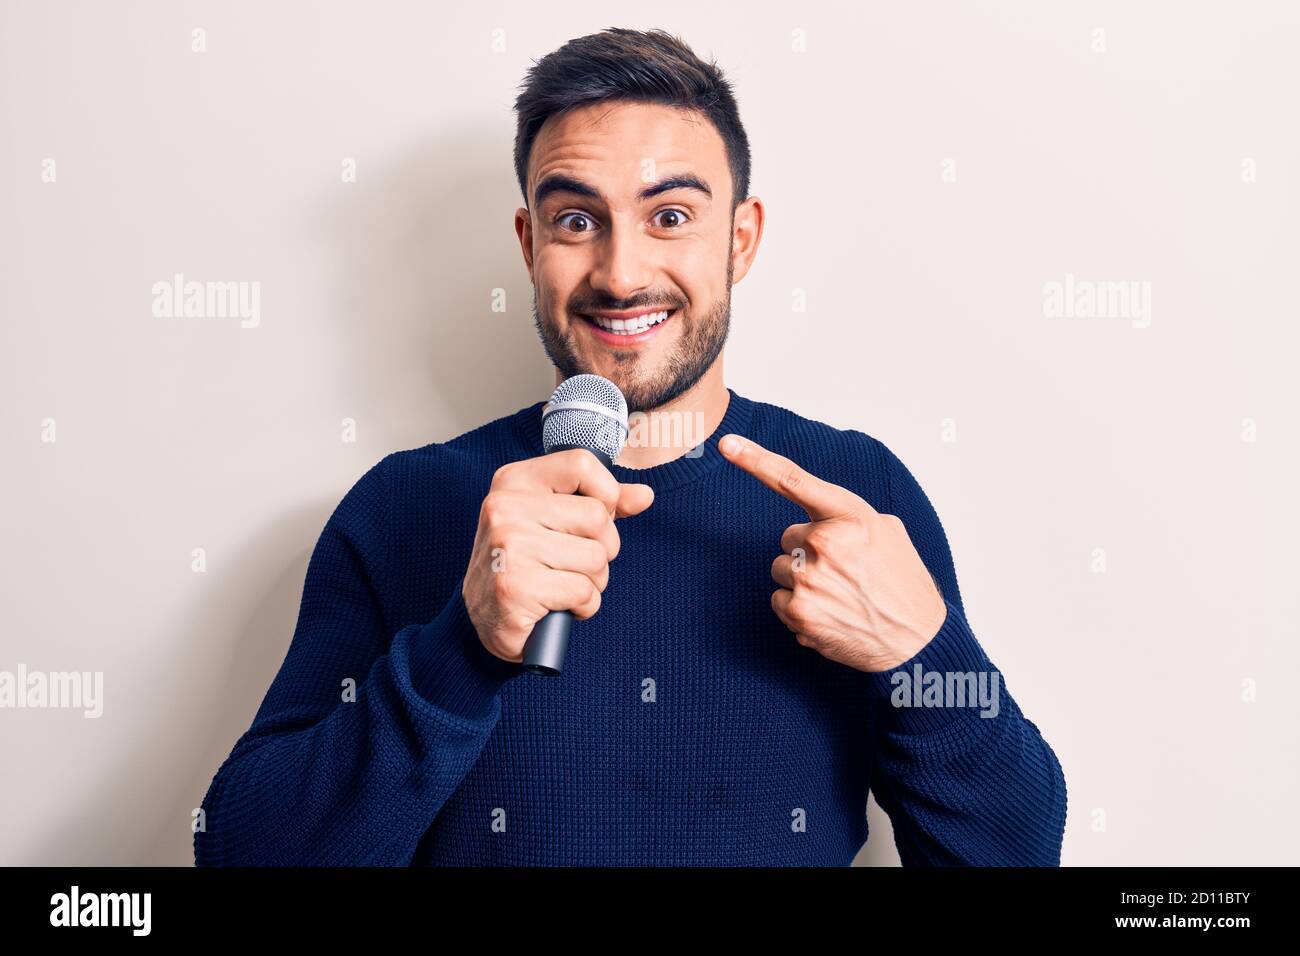 Young handsome singer man with beard singing song using microphone over  white background smiling happy pointing with hand and finger Stock Photo -  Alamy